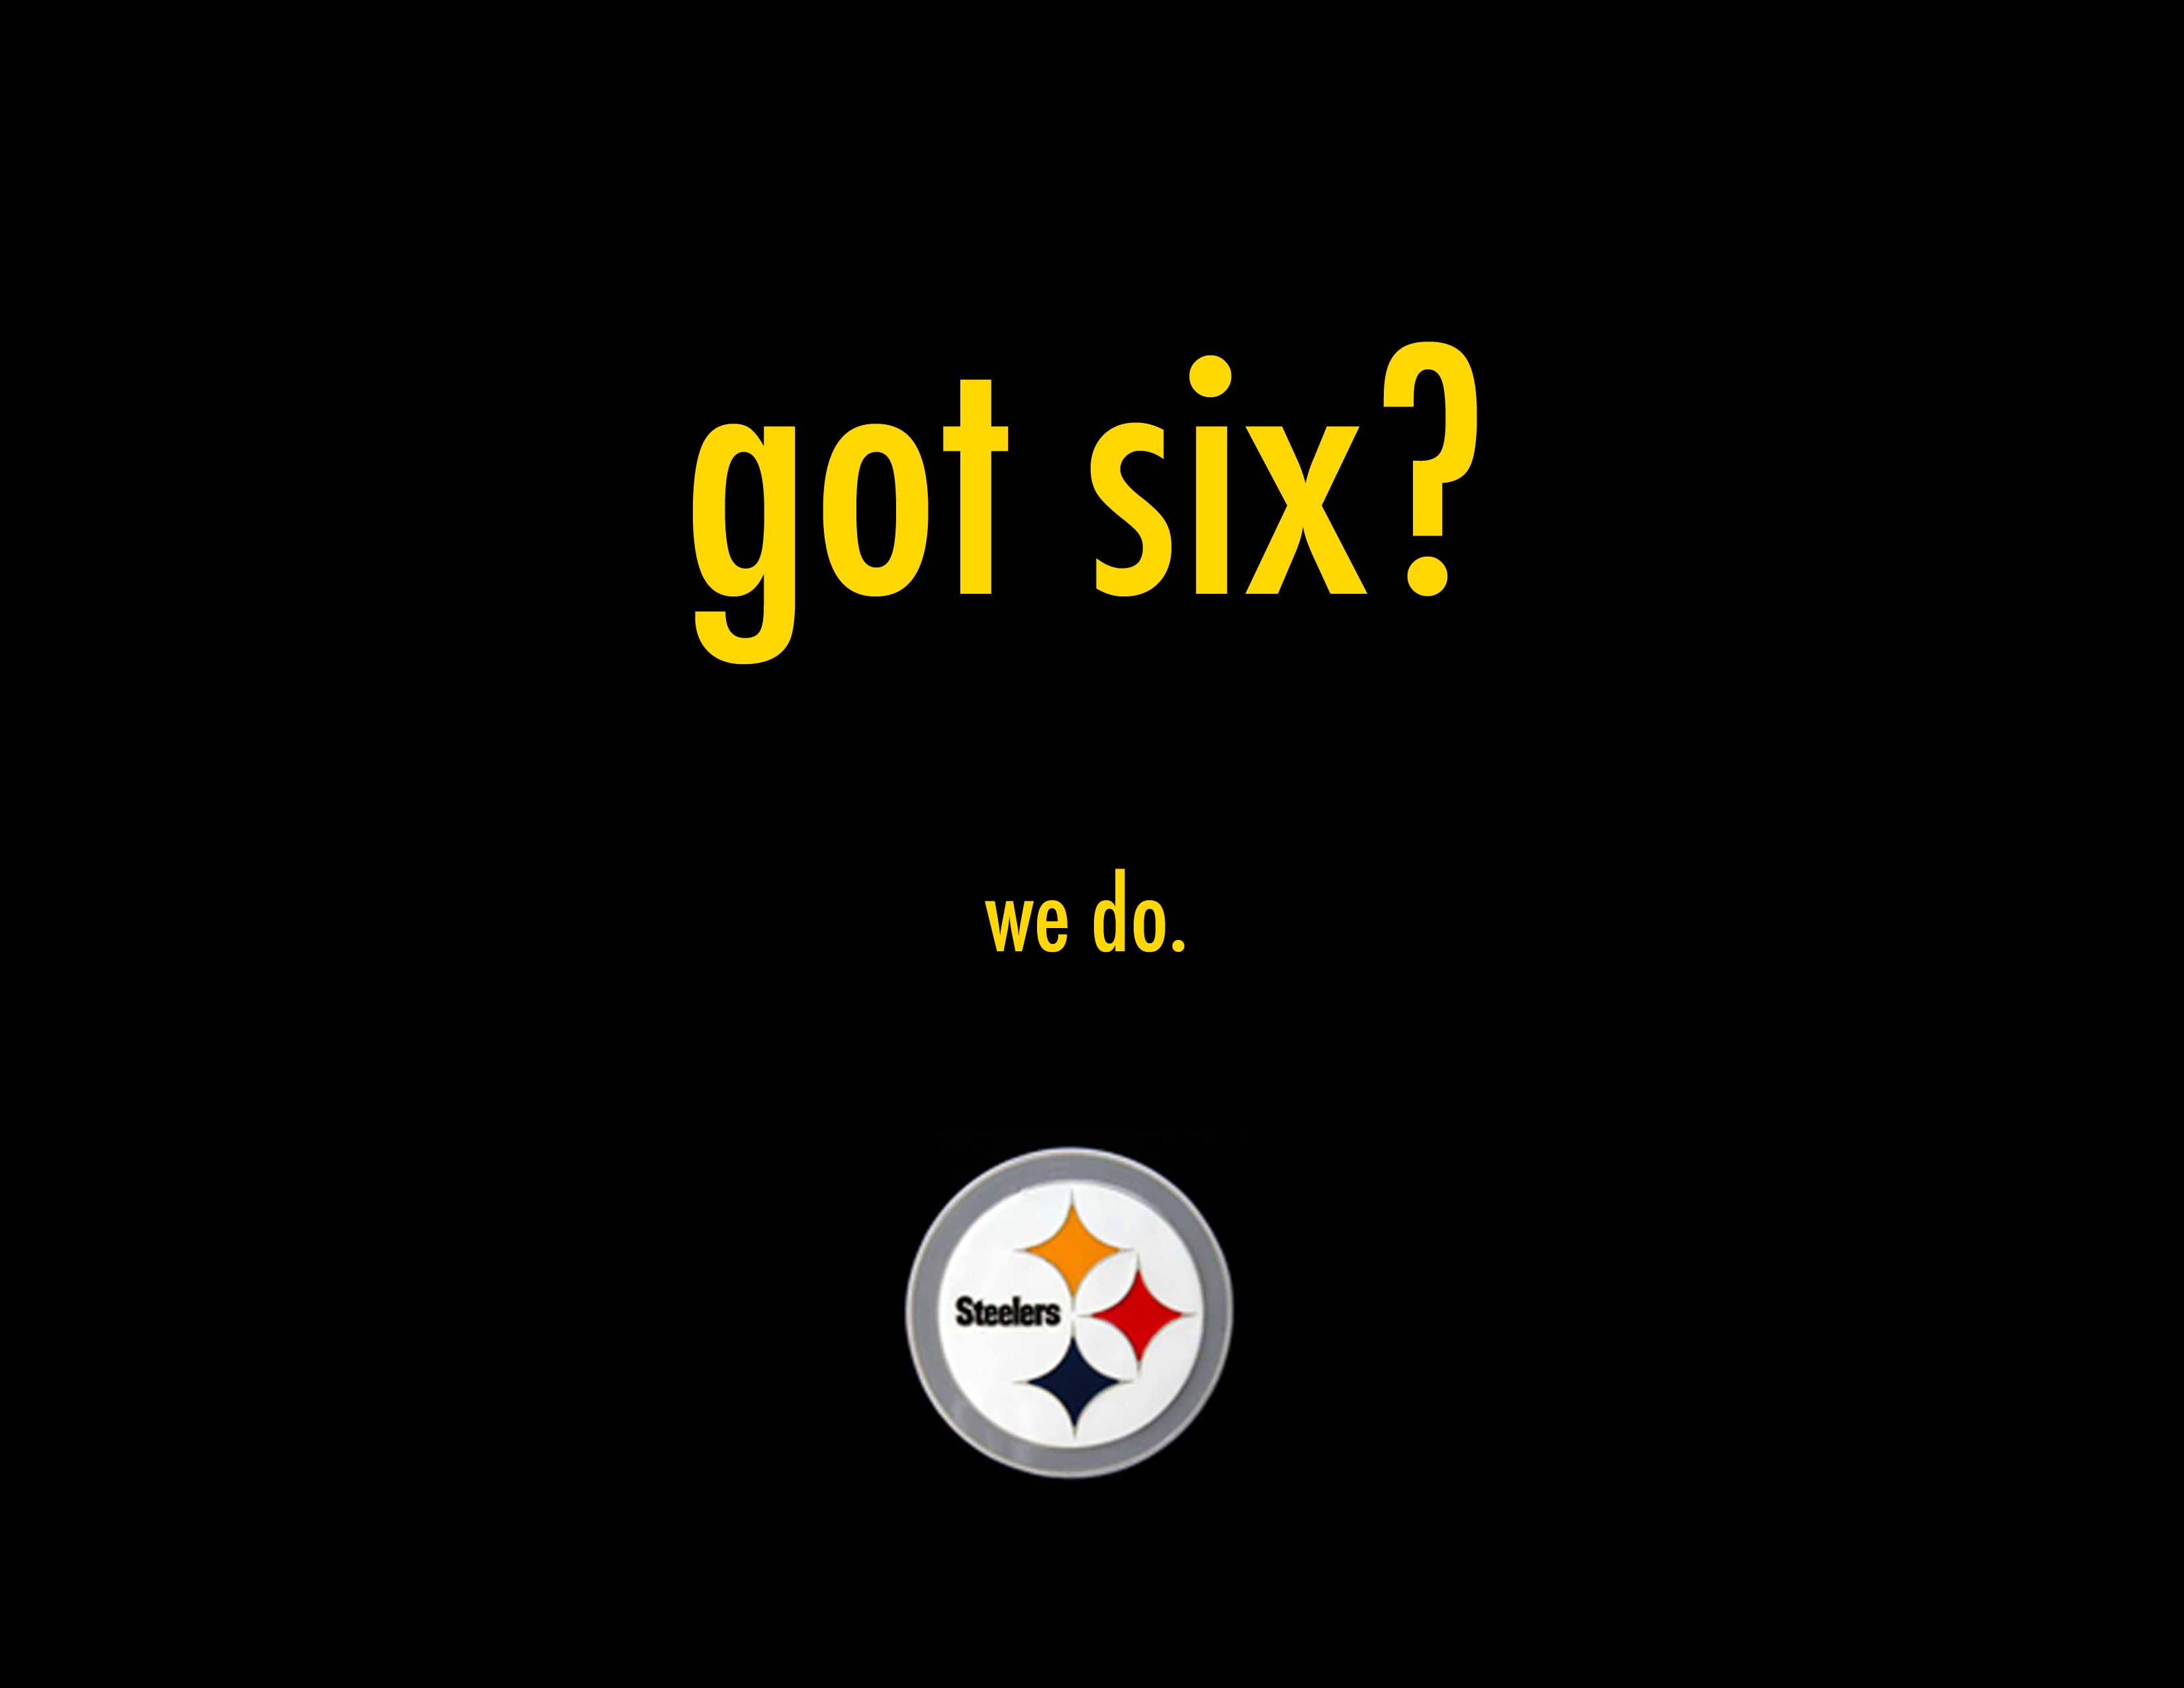 Images Of Pittsburgh Steelers - Pittsburgh Steelers Got Six - HD Wallpaper 